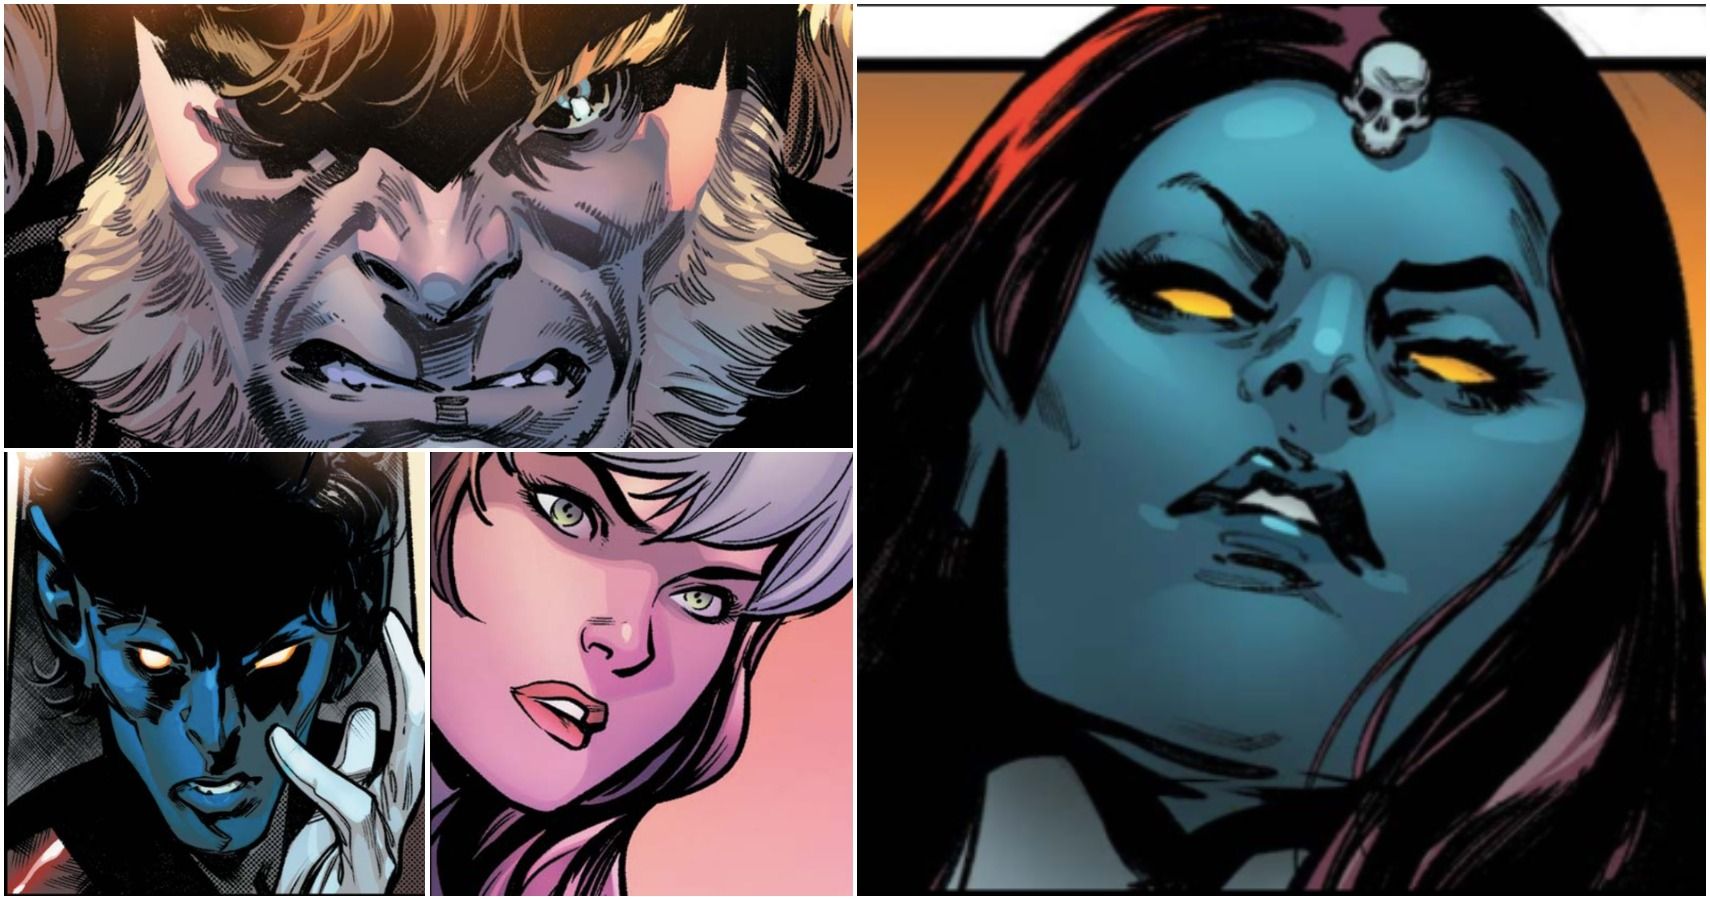 Rogue, Mystique, Sabretooth & Nightcrawler: Their Twisted Family Connec...